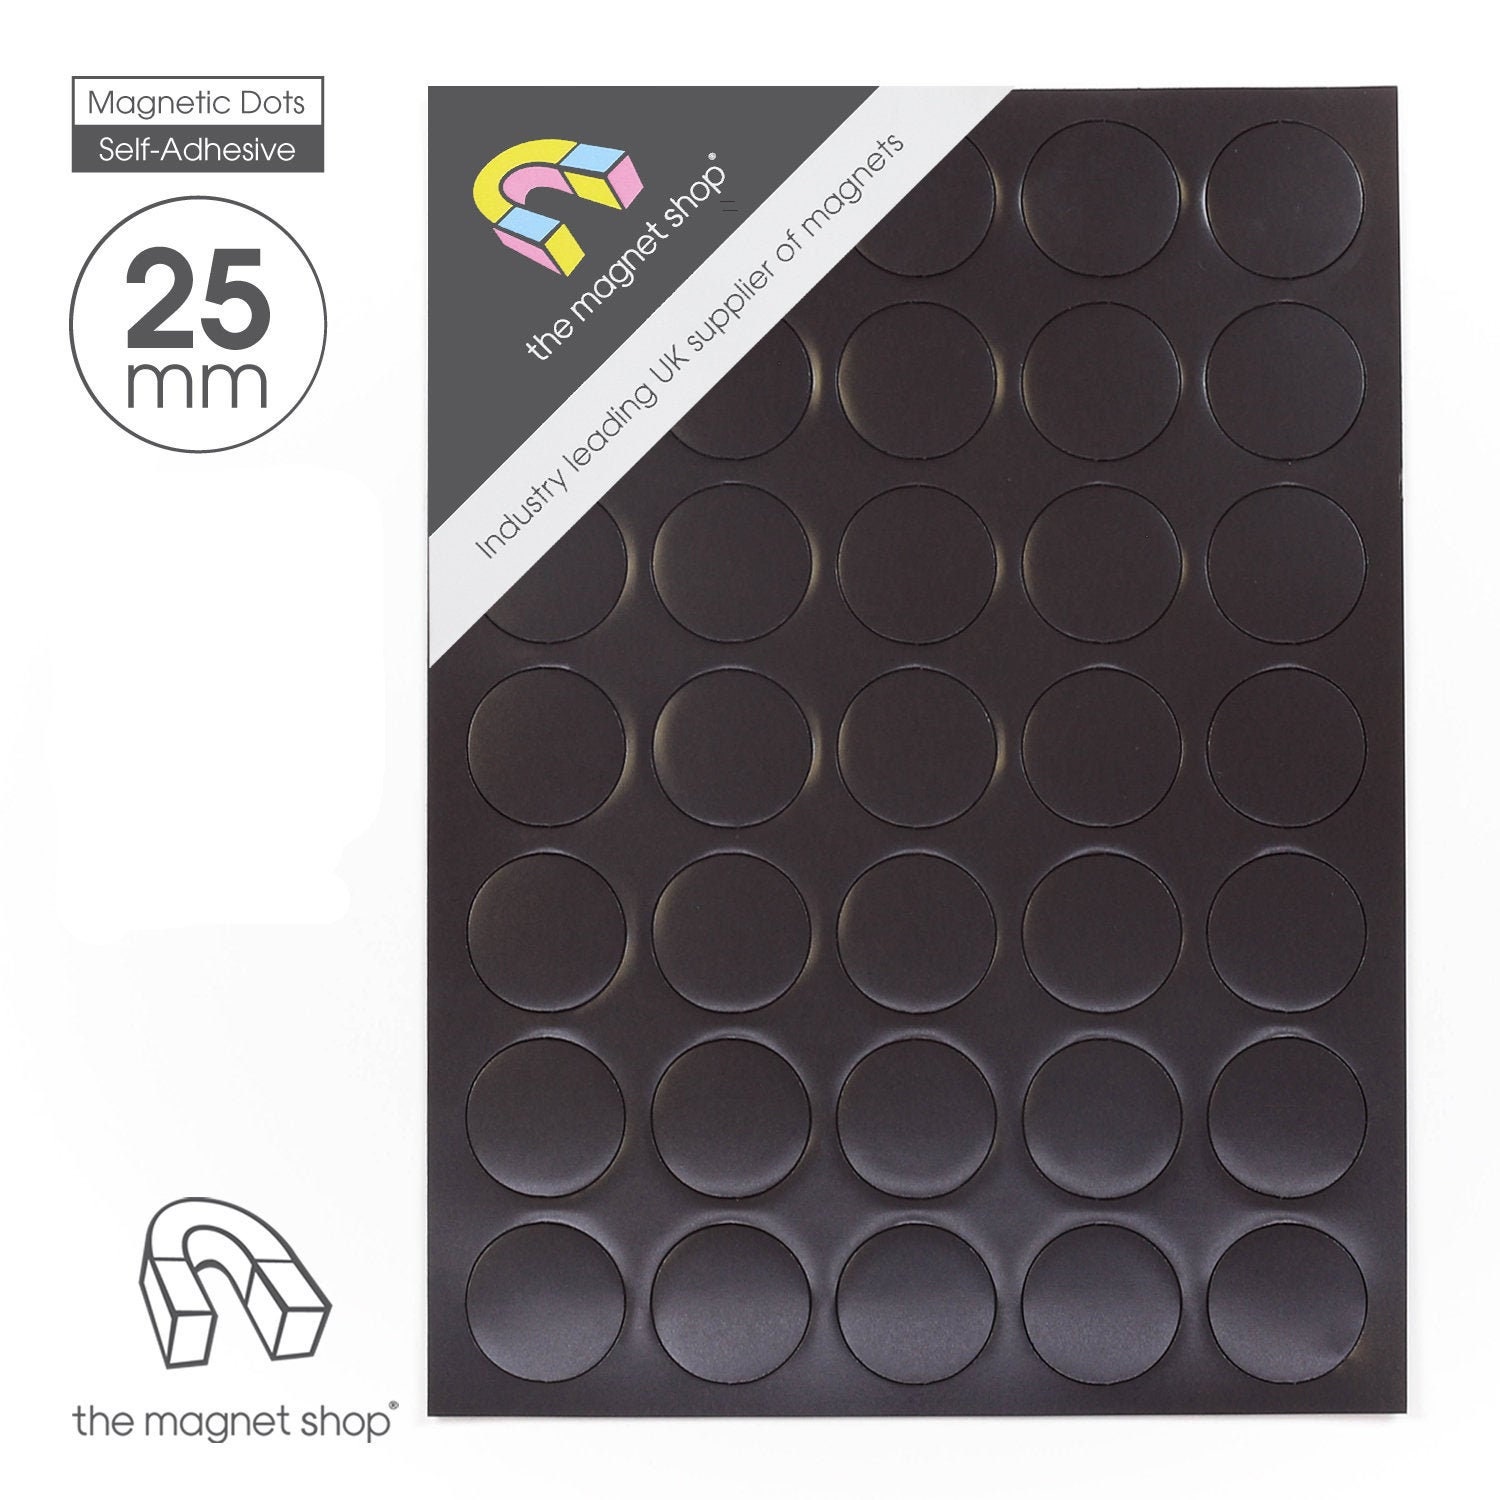 Self-adhesive Magnetic Circles 25mm Diameter for Crafts by the Magnet Shop®  